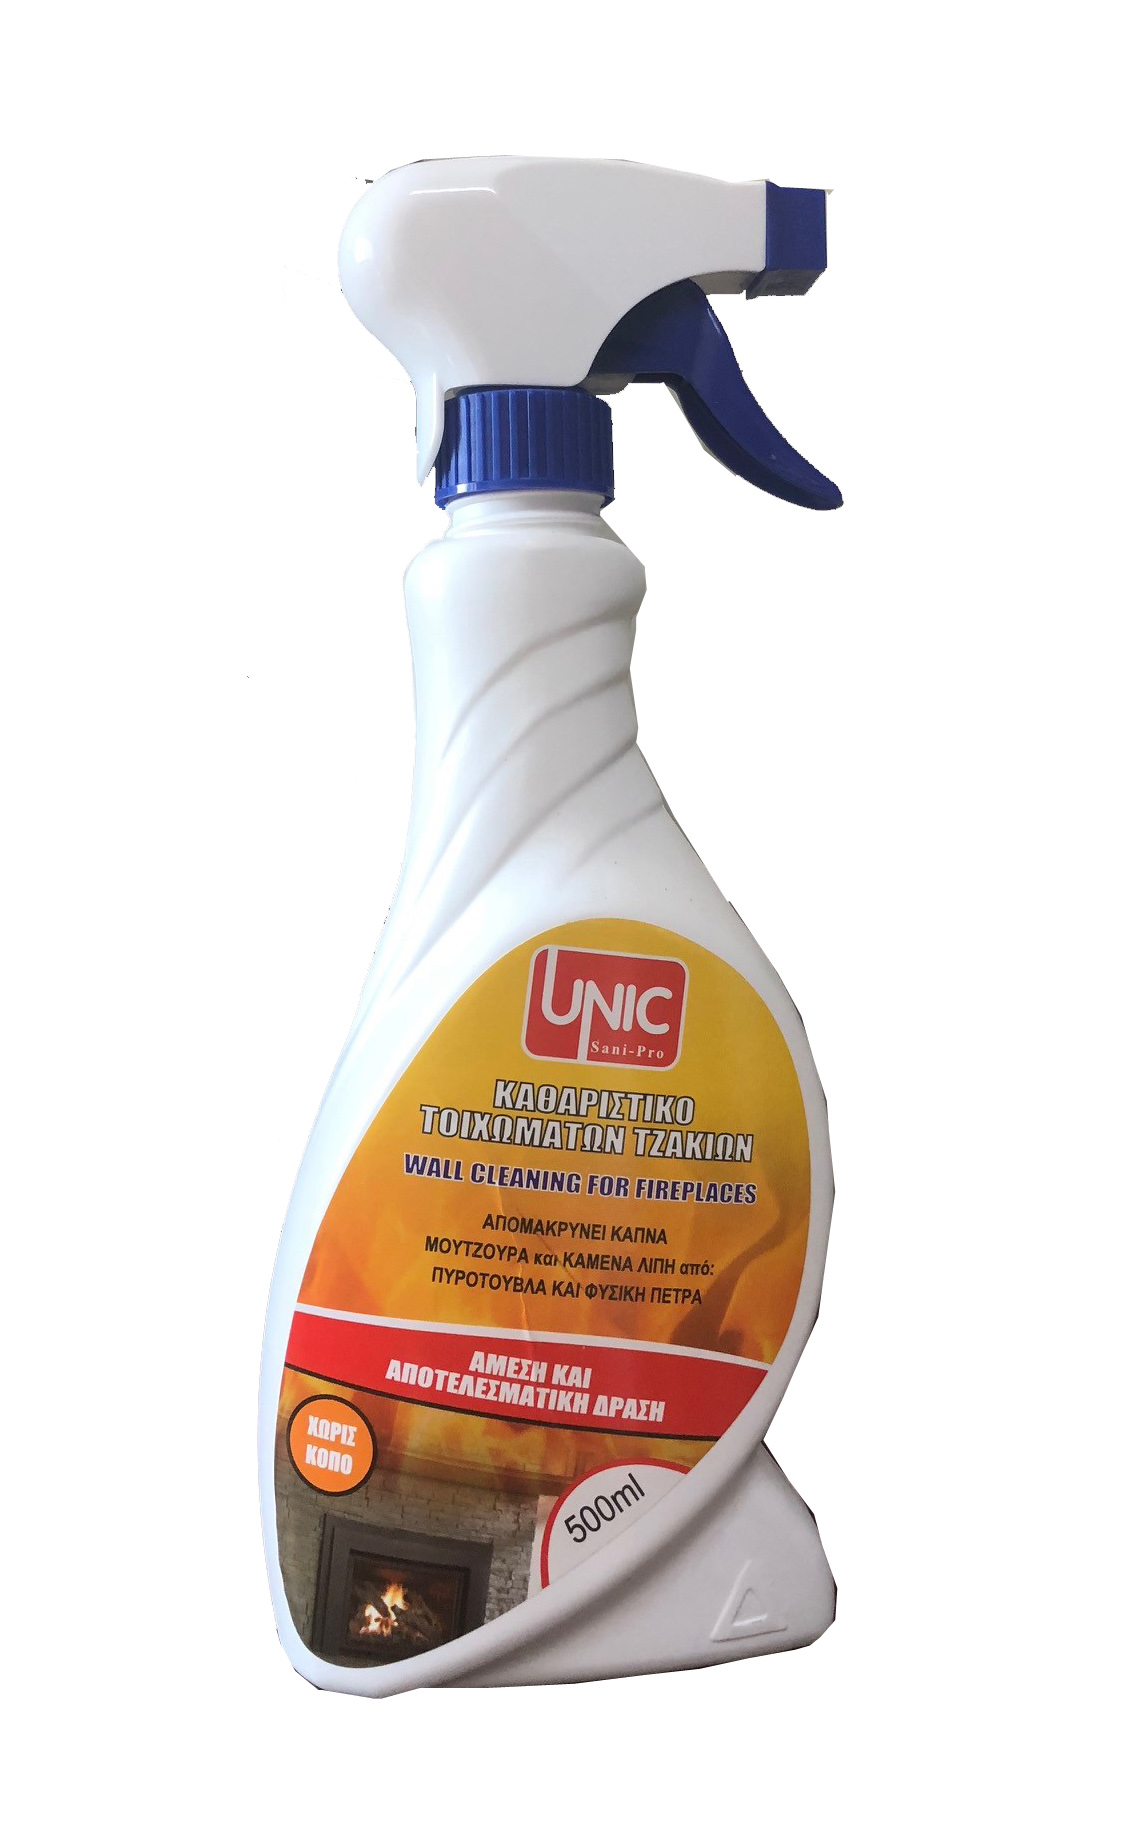 UNIC FIREPLACE WALL CLEANER